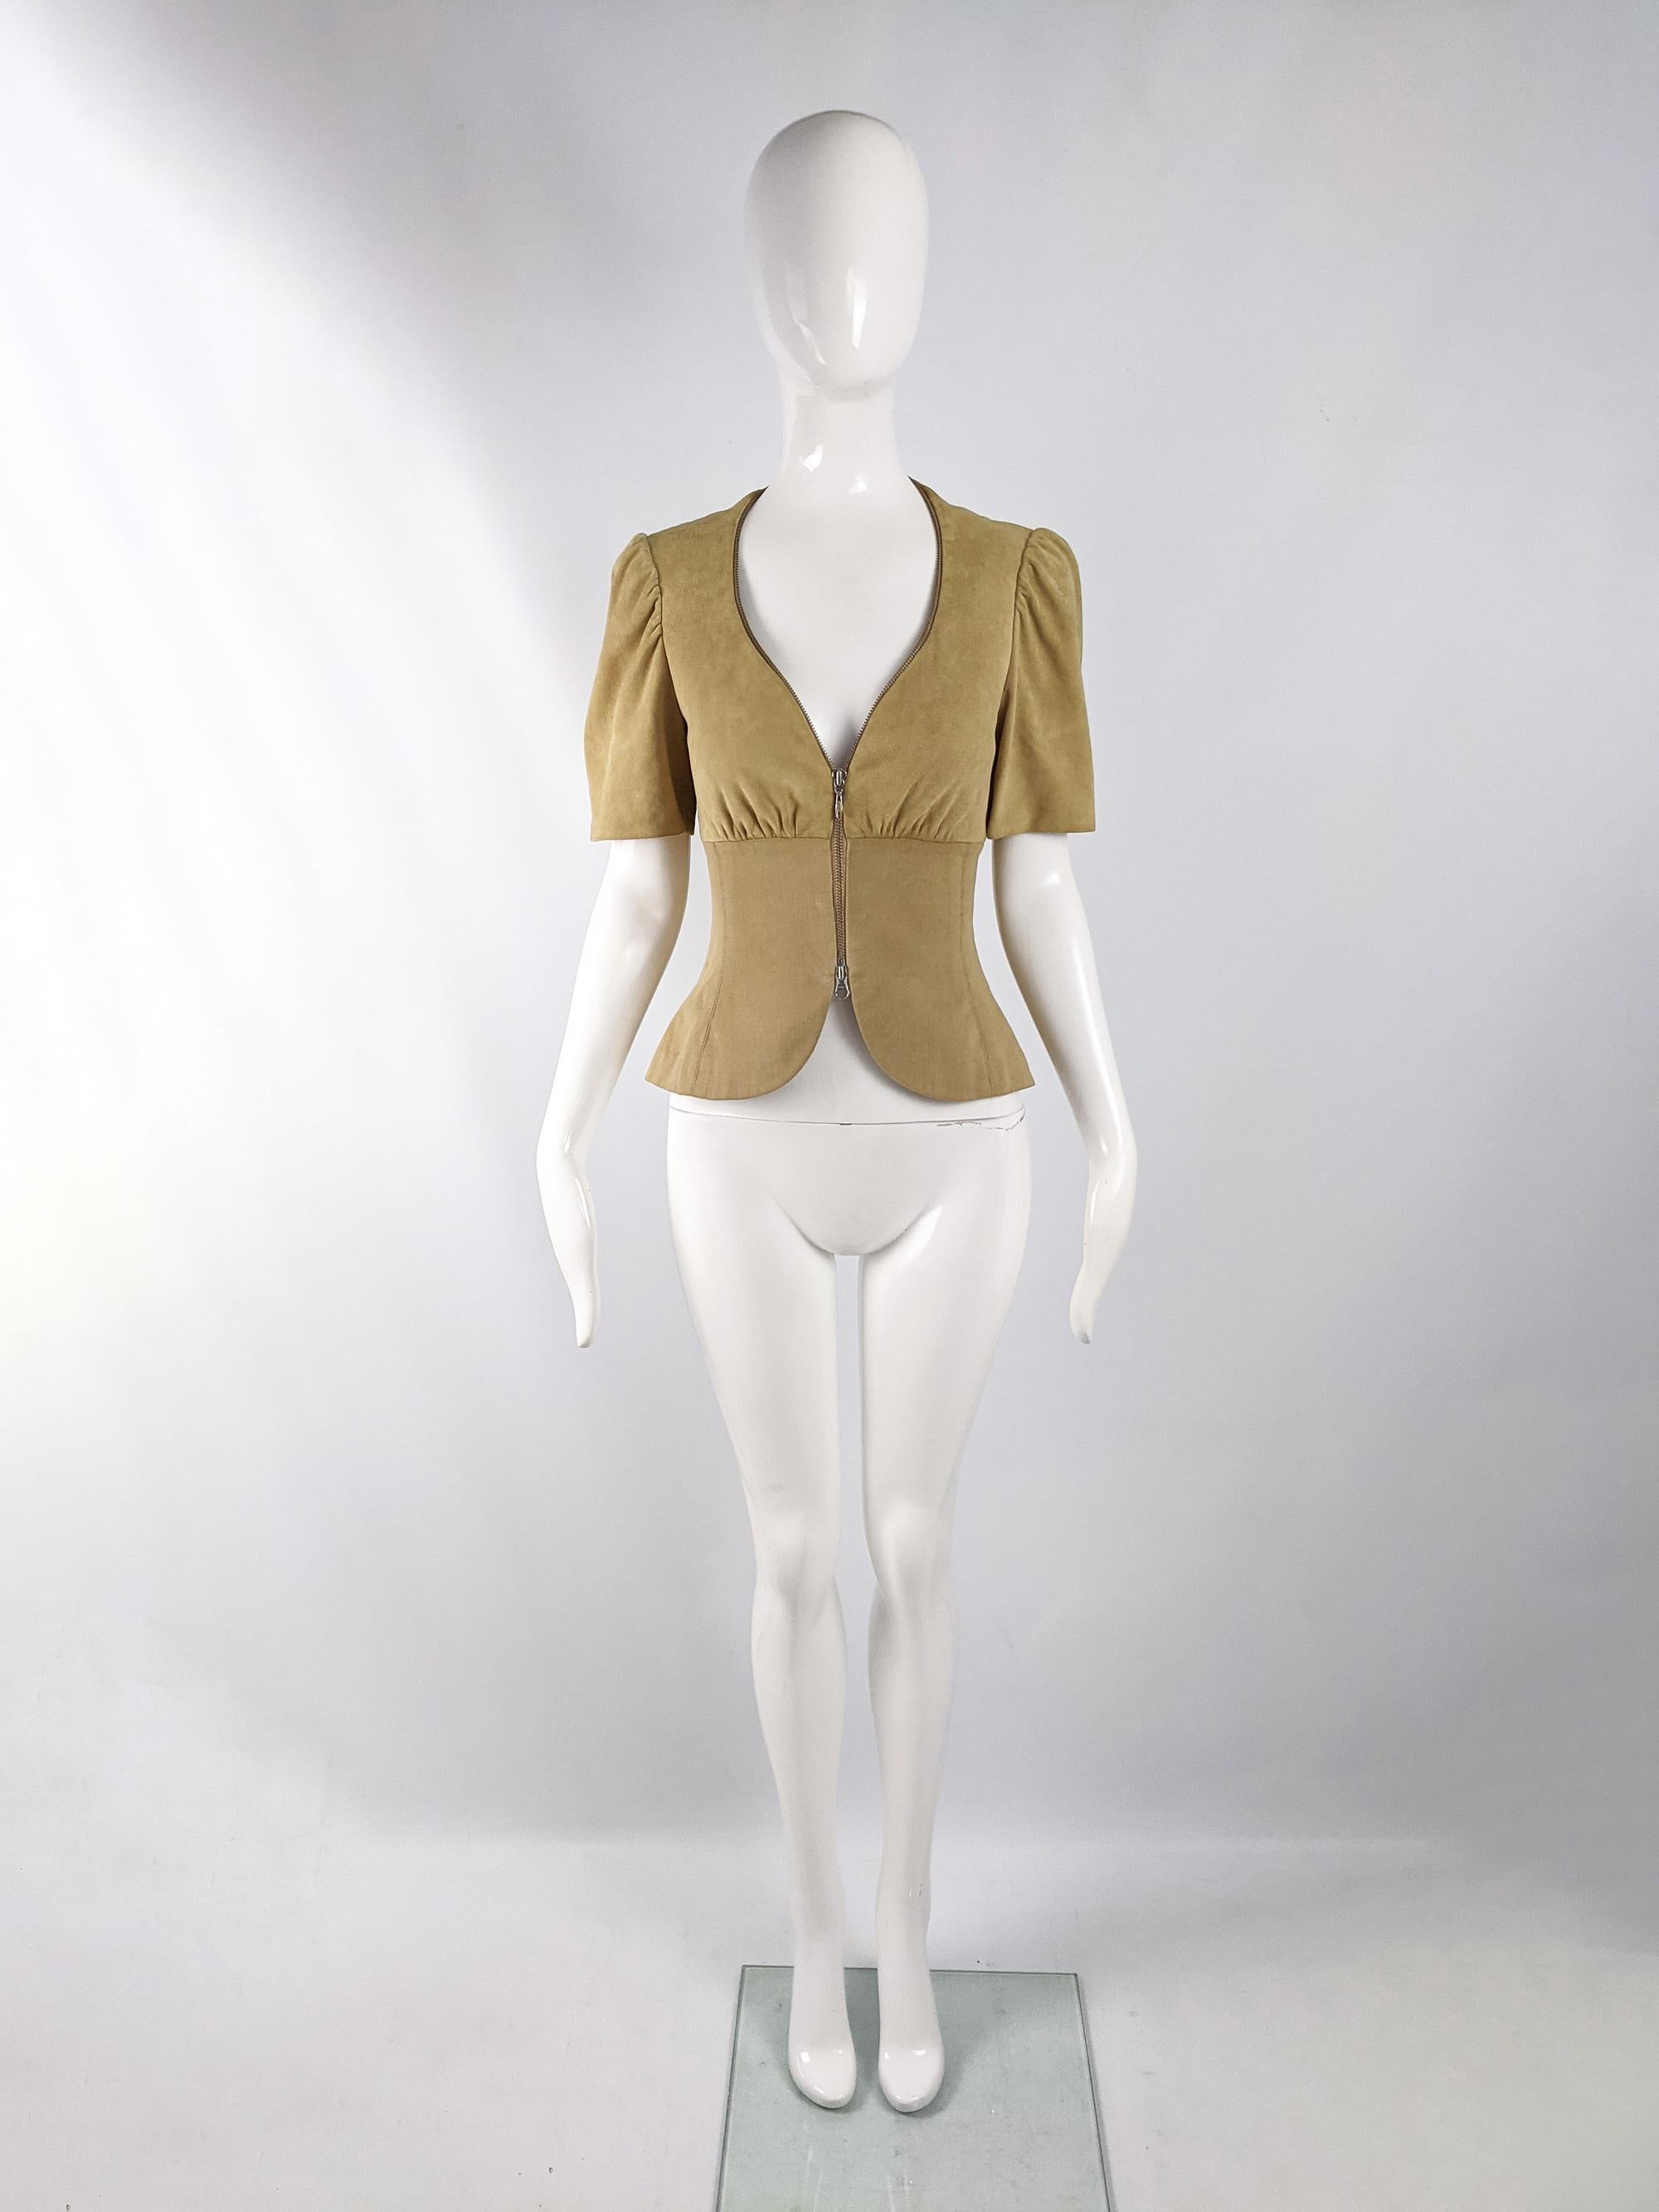 An impeccably tailored vintage womens jacket from the 80s by luxury British fashion designer and couturier, Hardy Amies. In a yellowish sandy suede fabric with a soft cotton tailored panel down from the bust. It has a metal, double zip feature and a